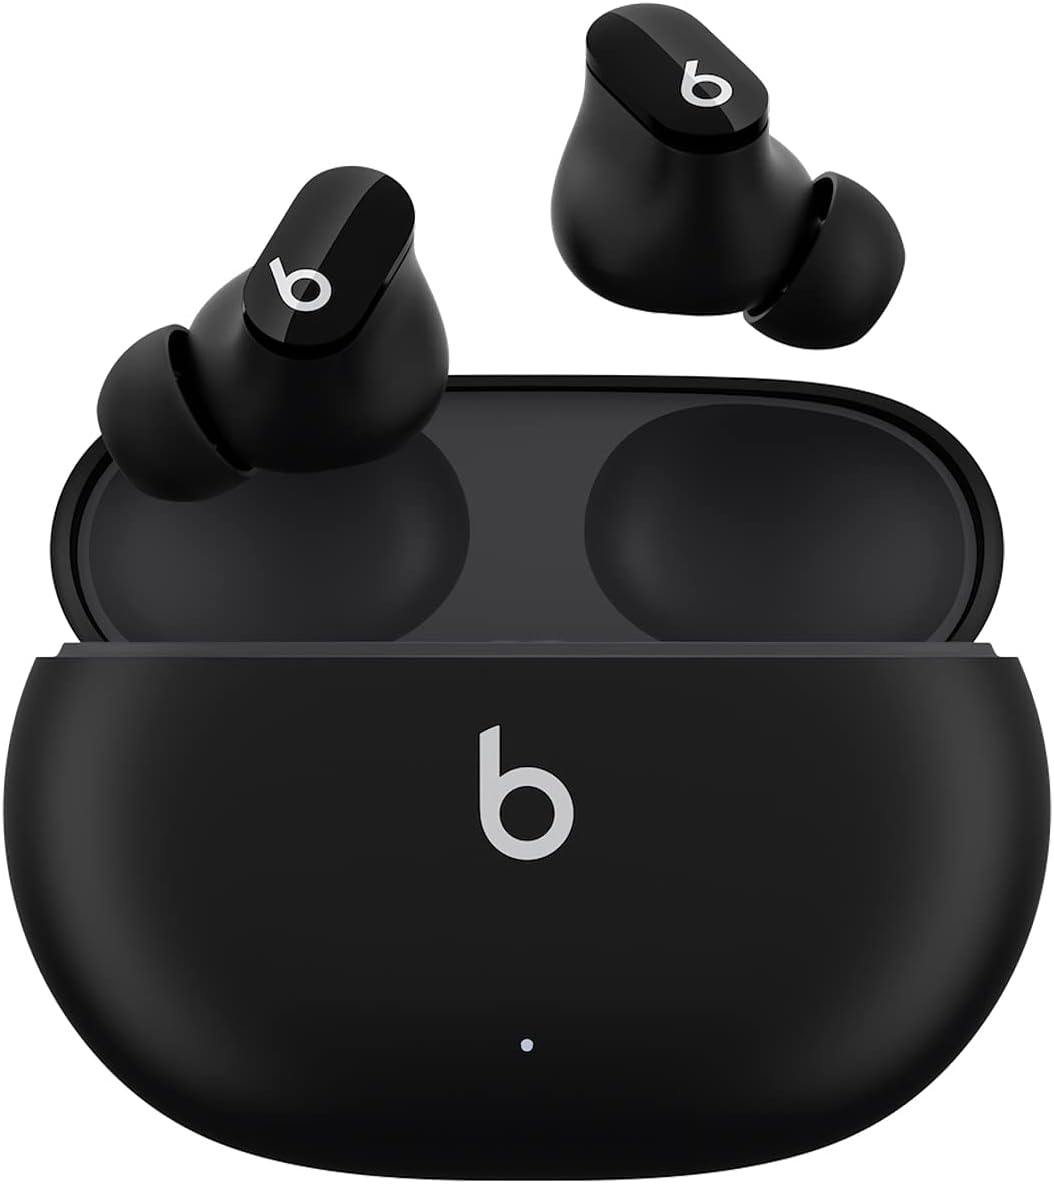 Beats Studio Buds True Wireless Noise Cancelling Bluetooth Earbuds (Various Colors) $89.95 + Free Shipping